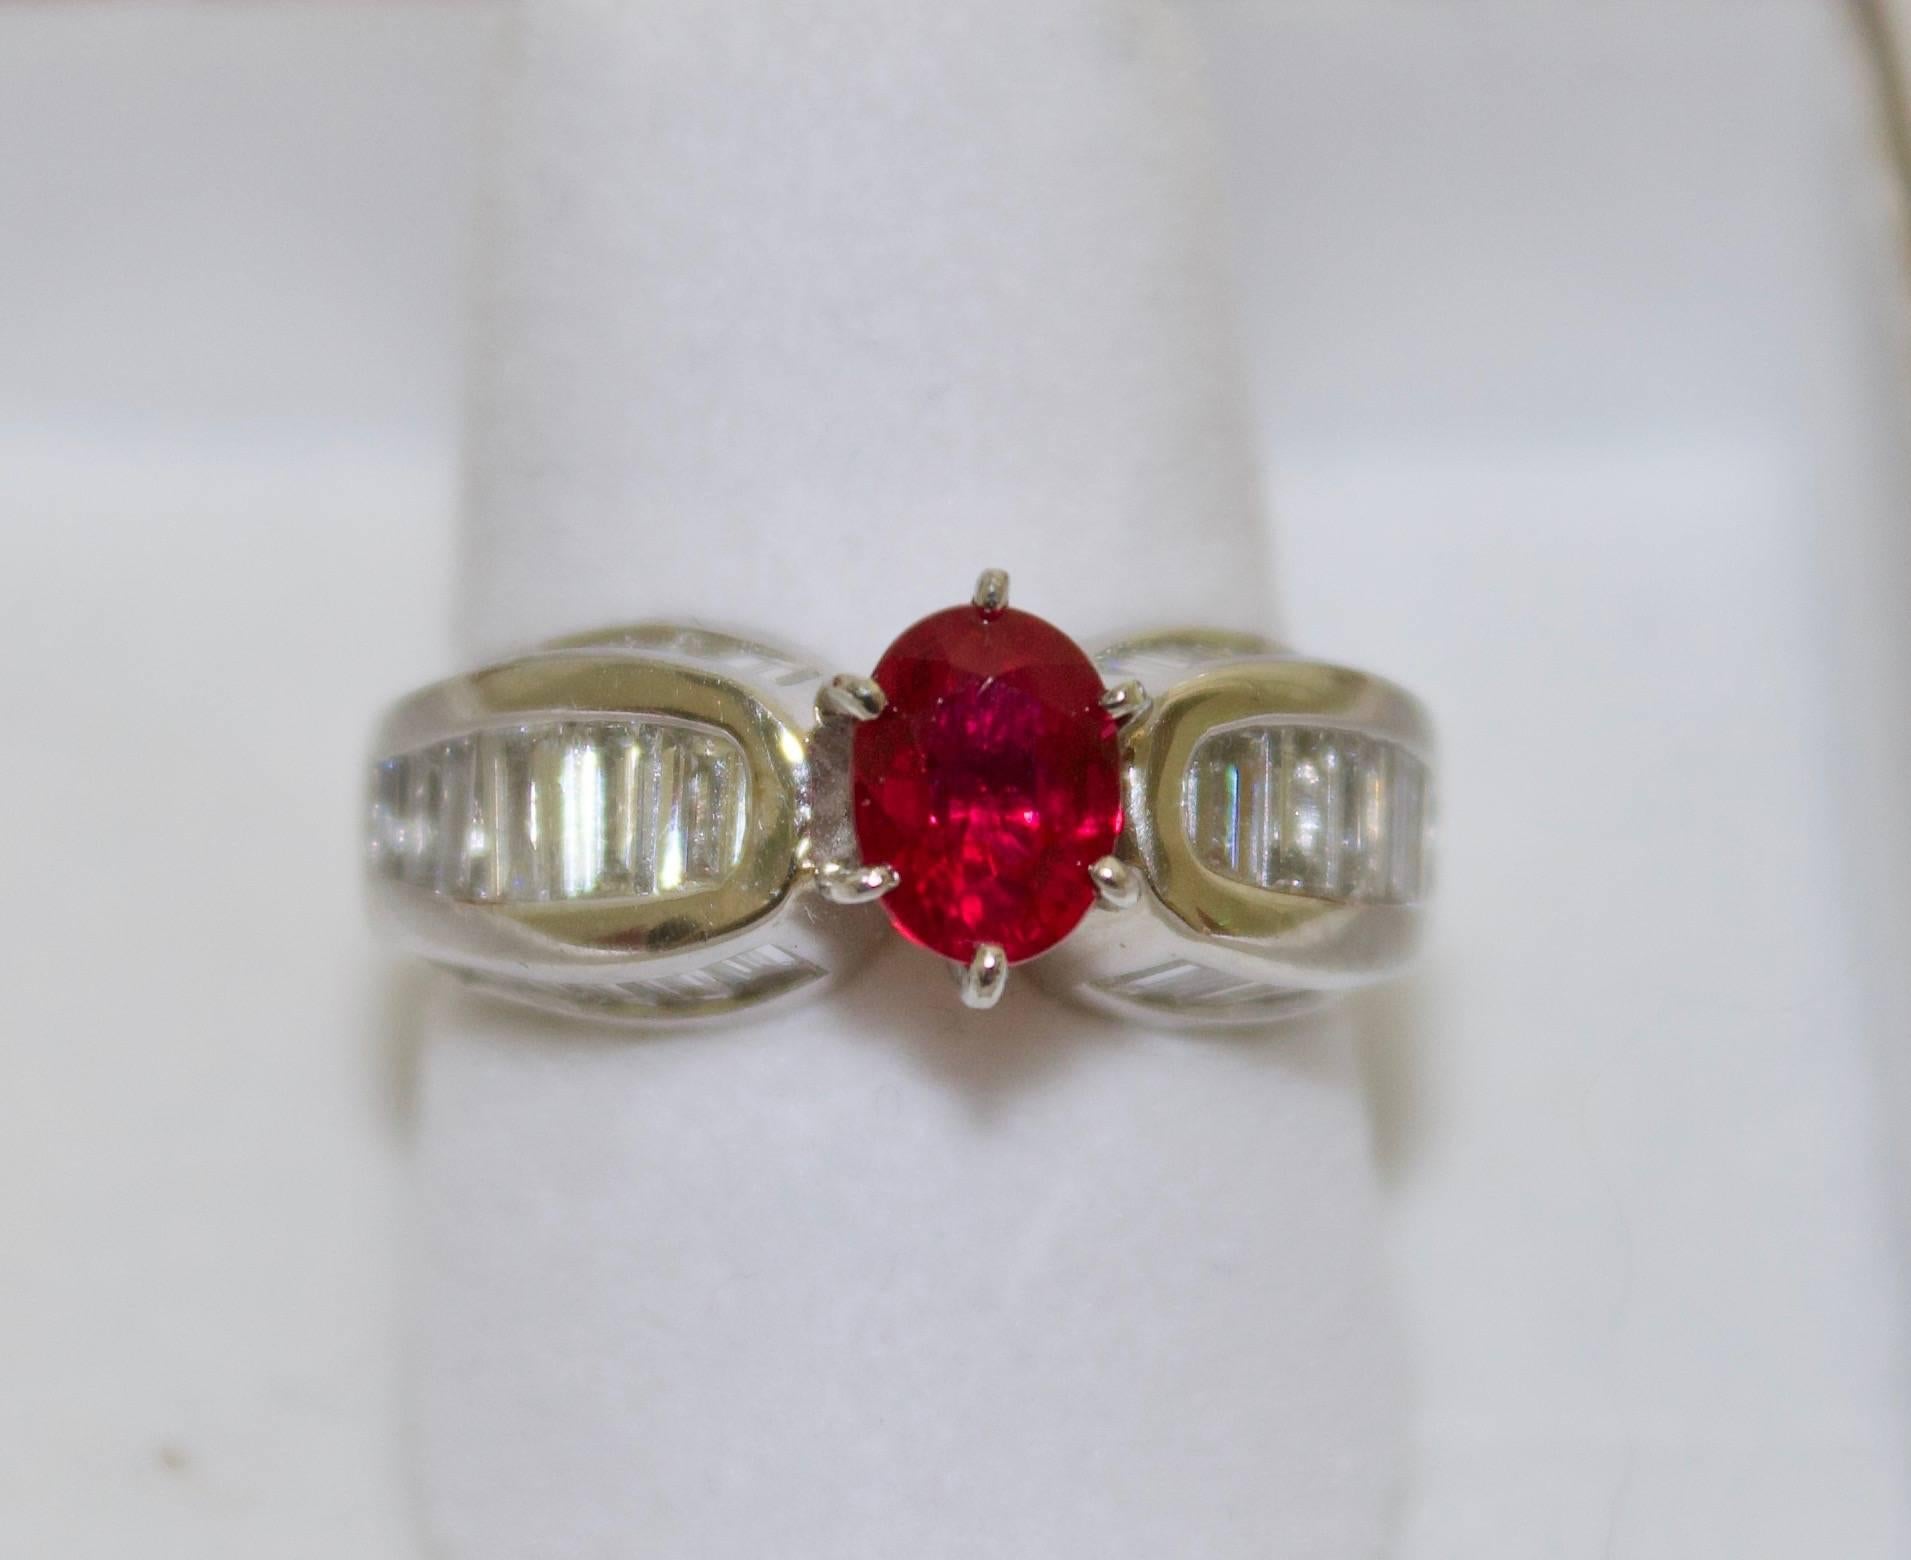 Stunning Ruby and Diamond Platinum Ring in Platinum
One Oval Ruby weighing 1.15 carats approximately Beautifully Red and Transparent (no visible imperfections to the naked eye or 10X magnification.
Tapered Baguette Cut Diamonds weighing 2.00 carats